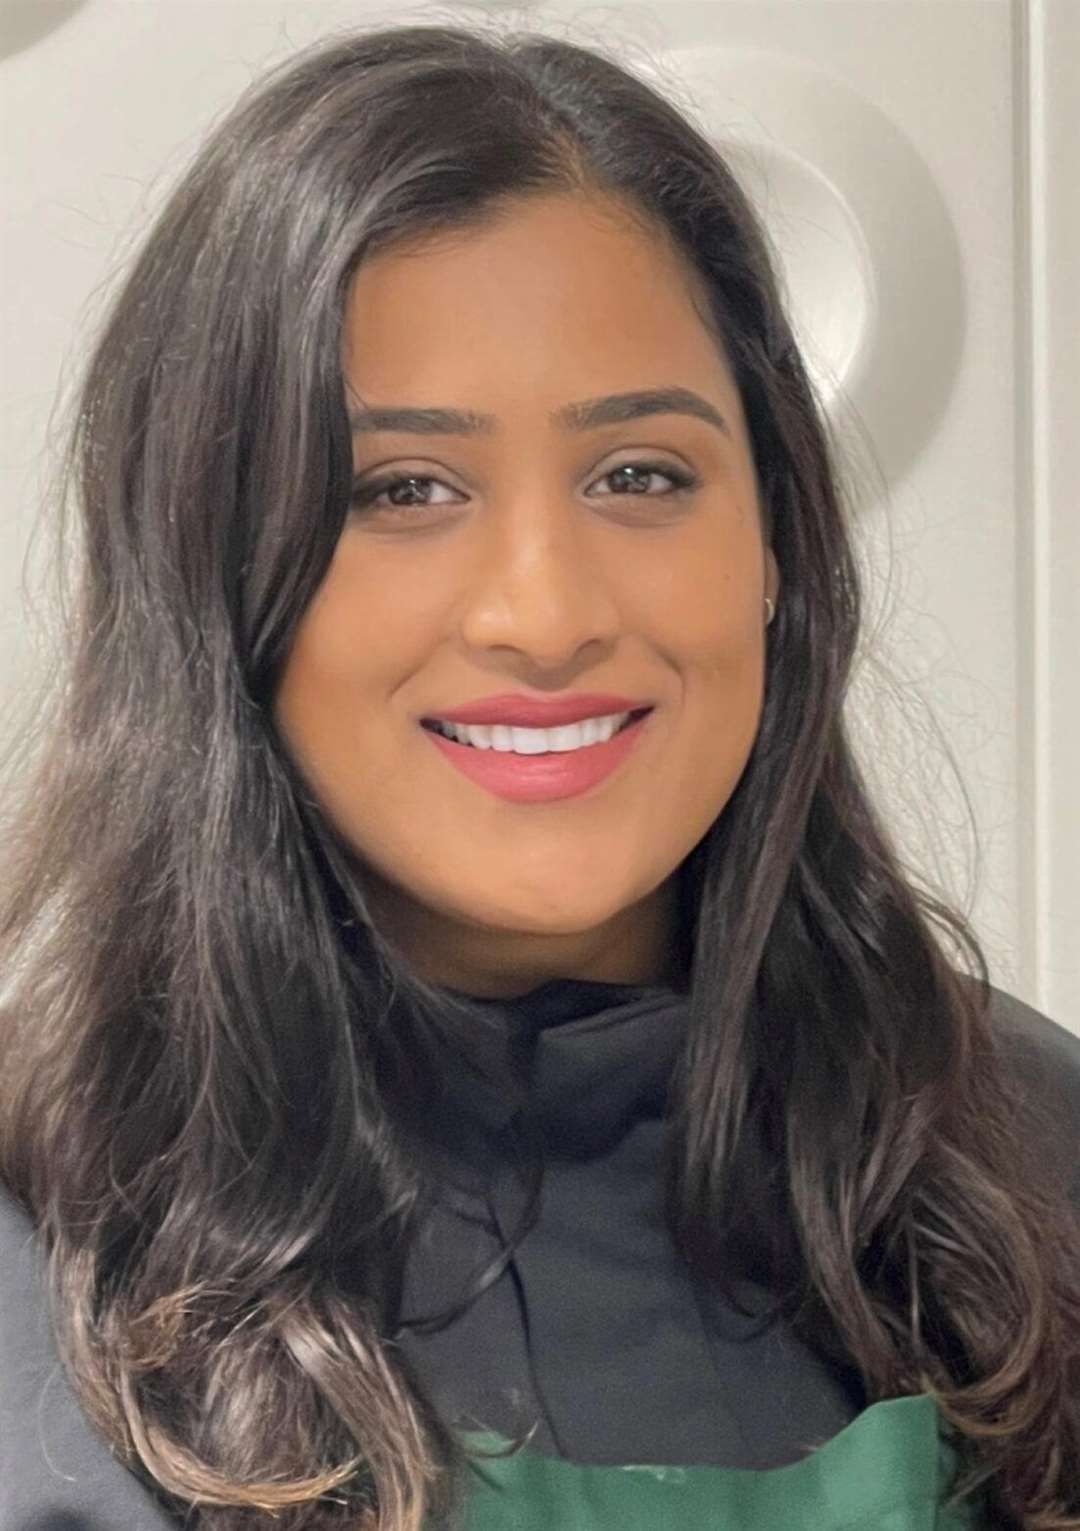 Tanvi Paul, 32, owns Gorj and Pineapple beauty salons in Strood. Picture: Improve Strood | Tanvi Paul